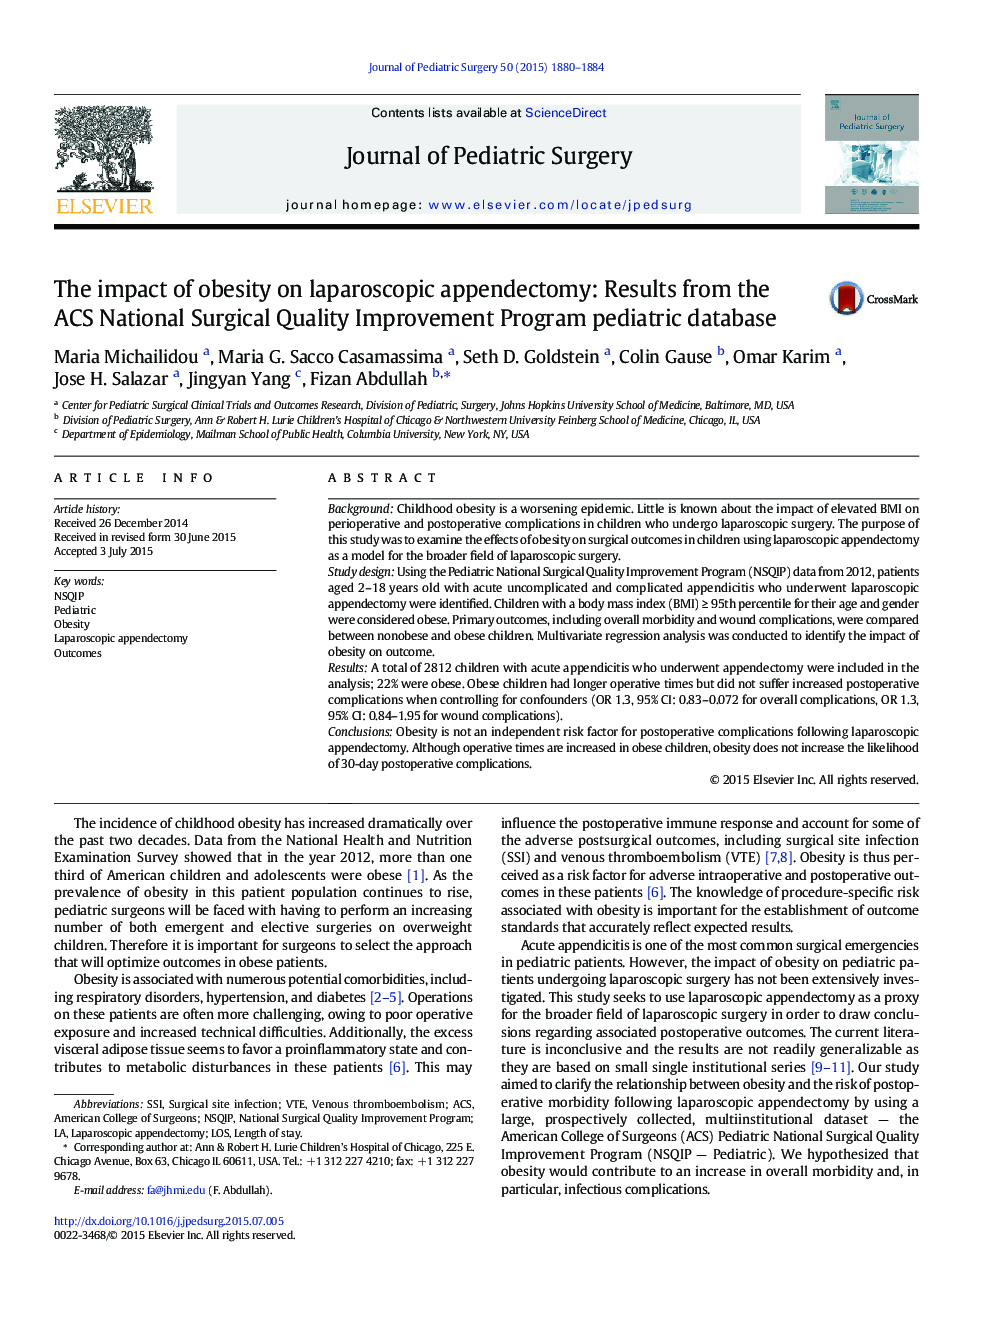 The impact of obesity on laparoscopic appendectomy: Results from the ACS National Surgical Quality Improvement Program pediatric database